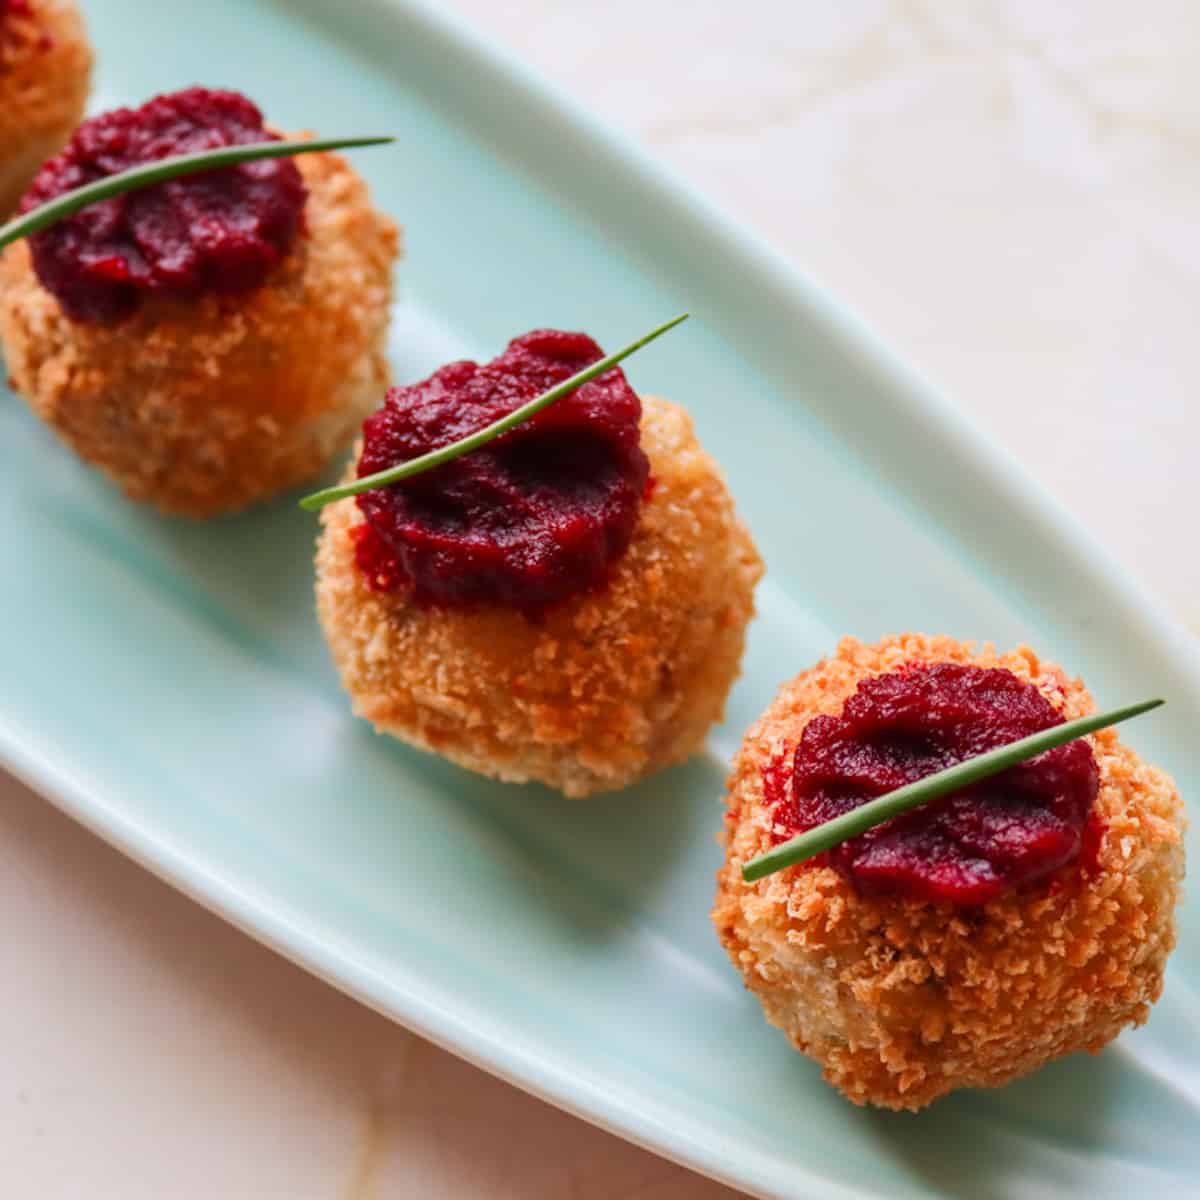 Smoked mackerel croquettes with beetroot puree on a canapé tray